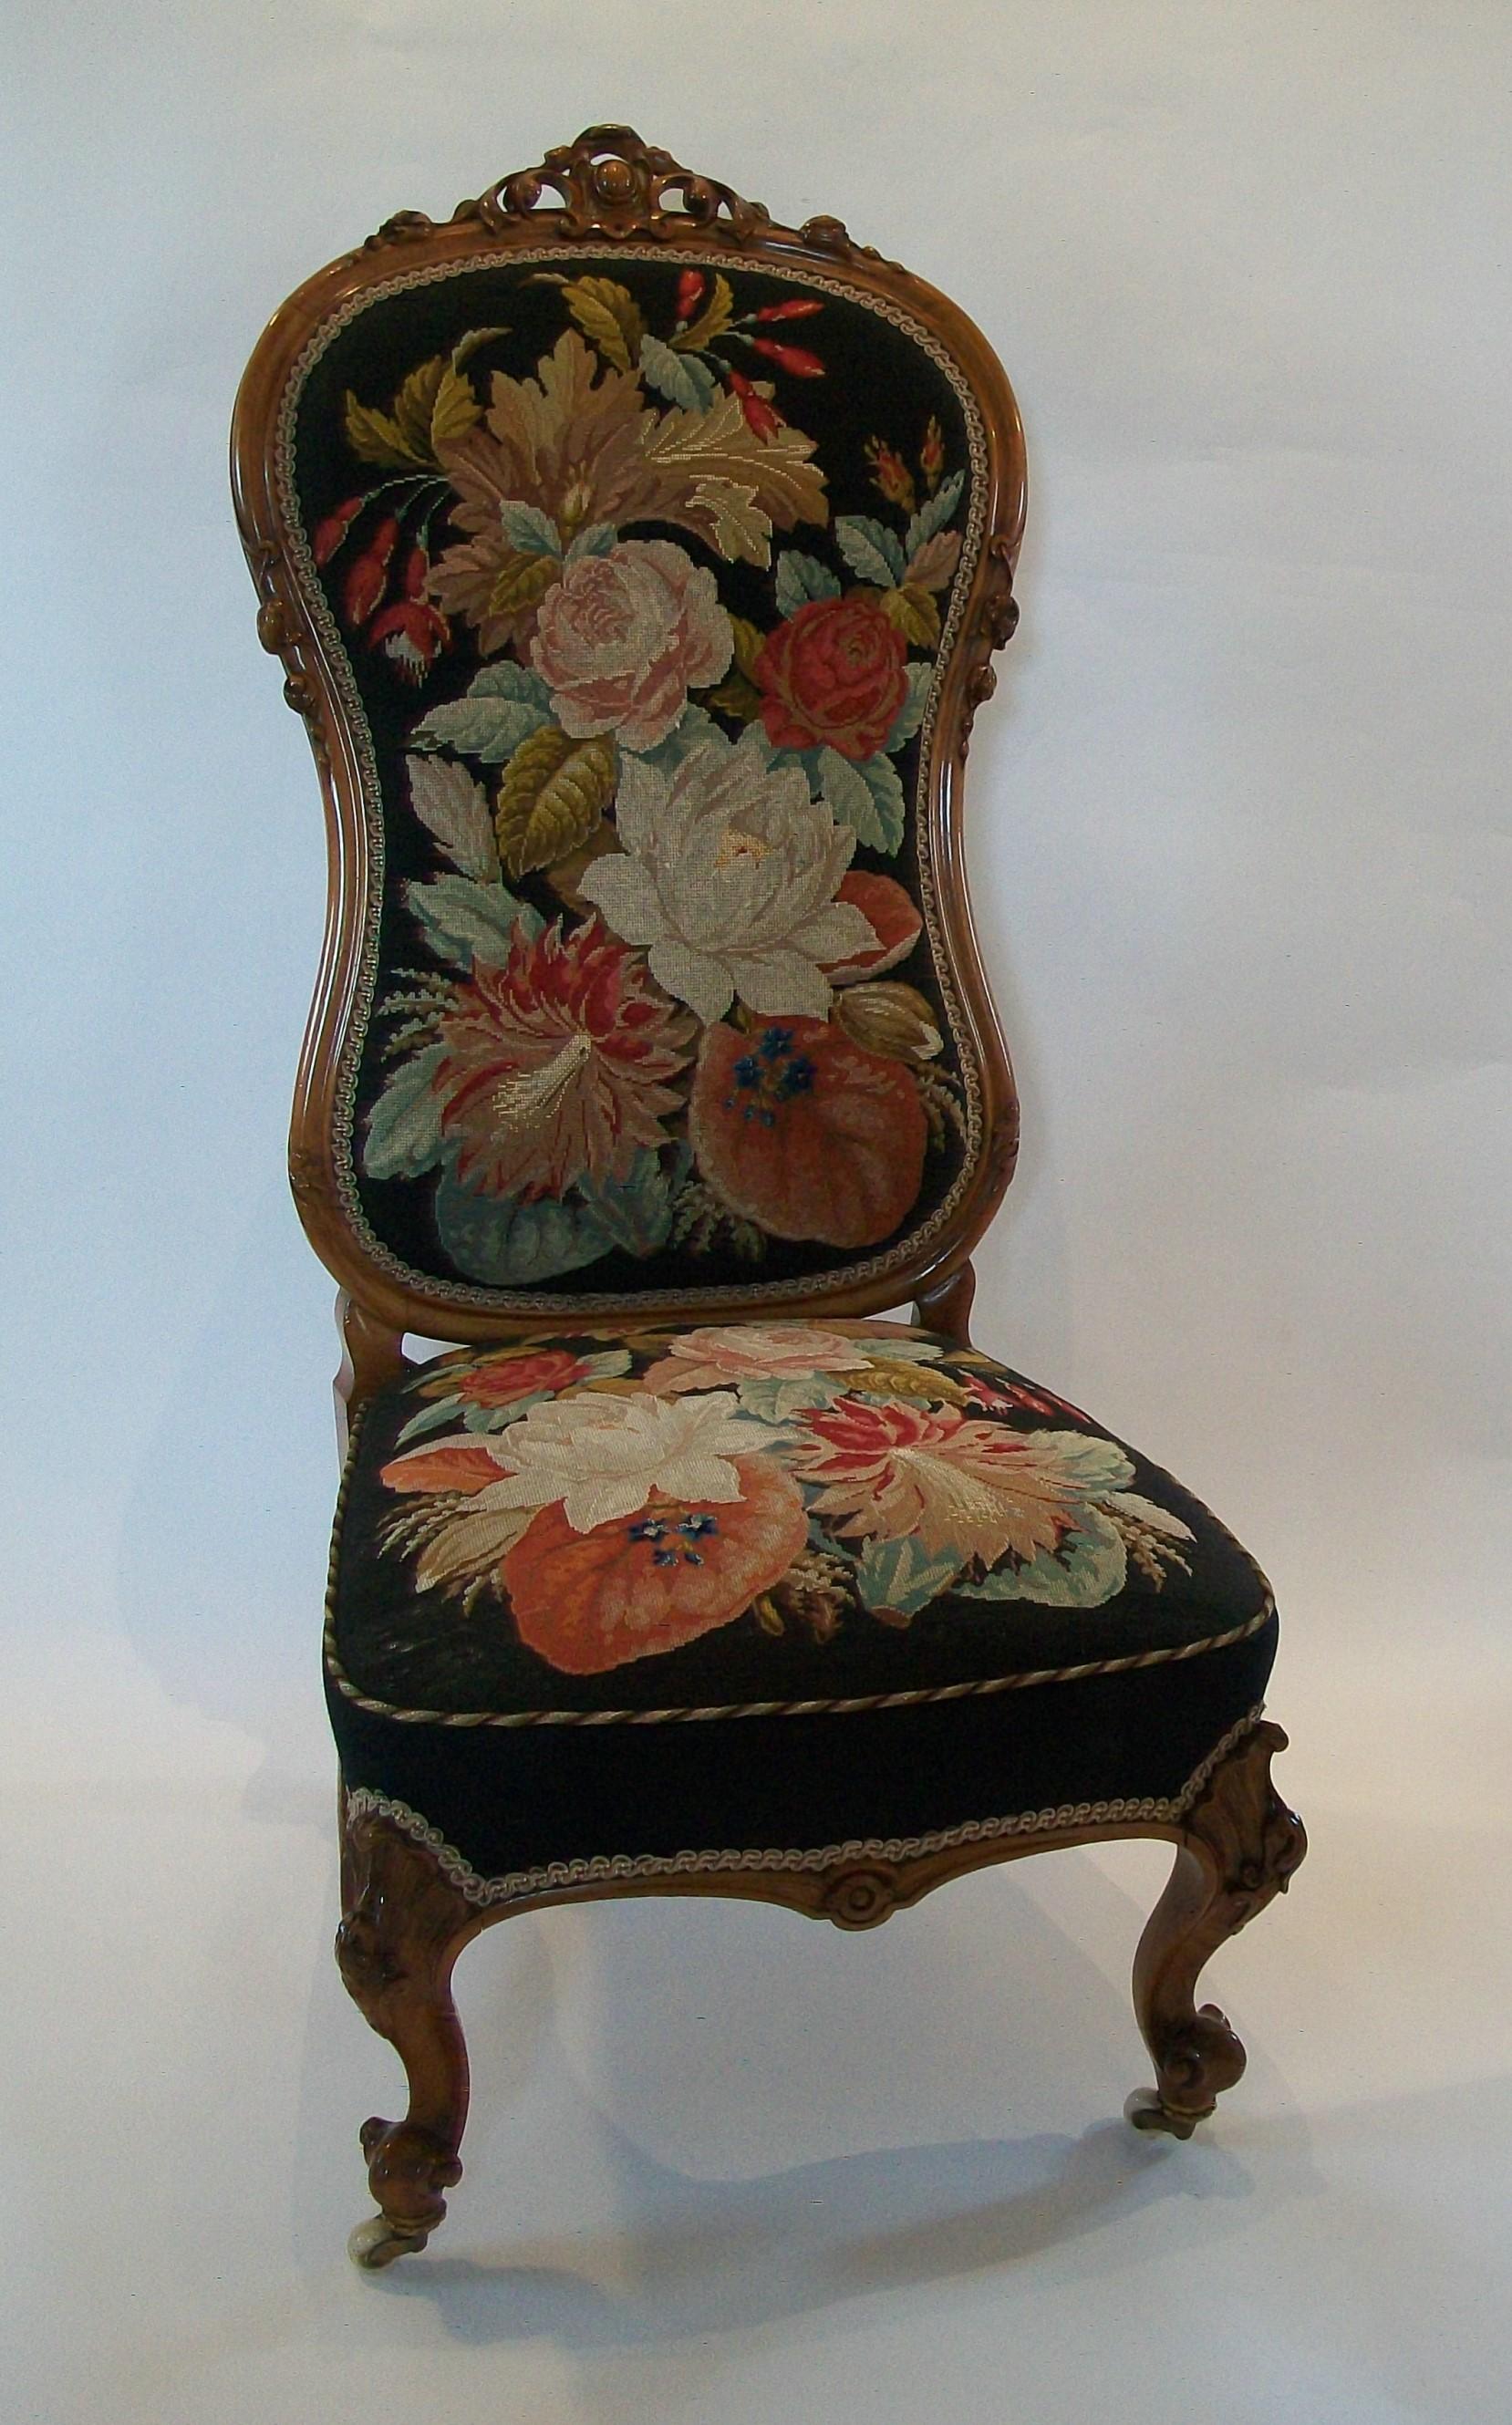 High Victorian walnut framed nursing / occasional chair with original needlepoint tapestry and decorative gimp cord - exceptional bench made hand carved quality frame with warm aged patina - featuring tapestry upholstery with flowers and tobacco